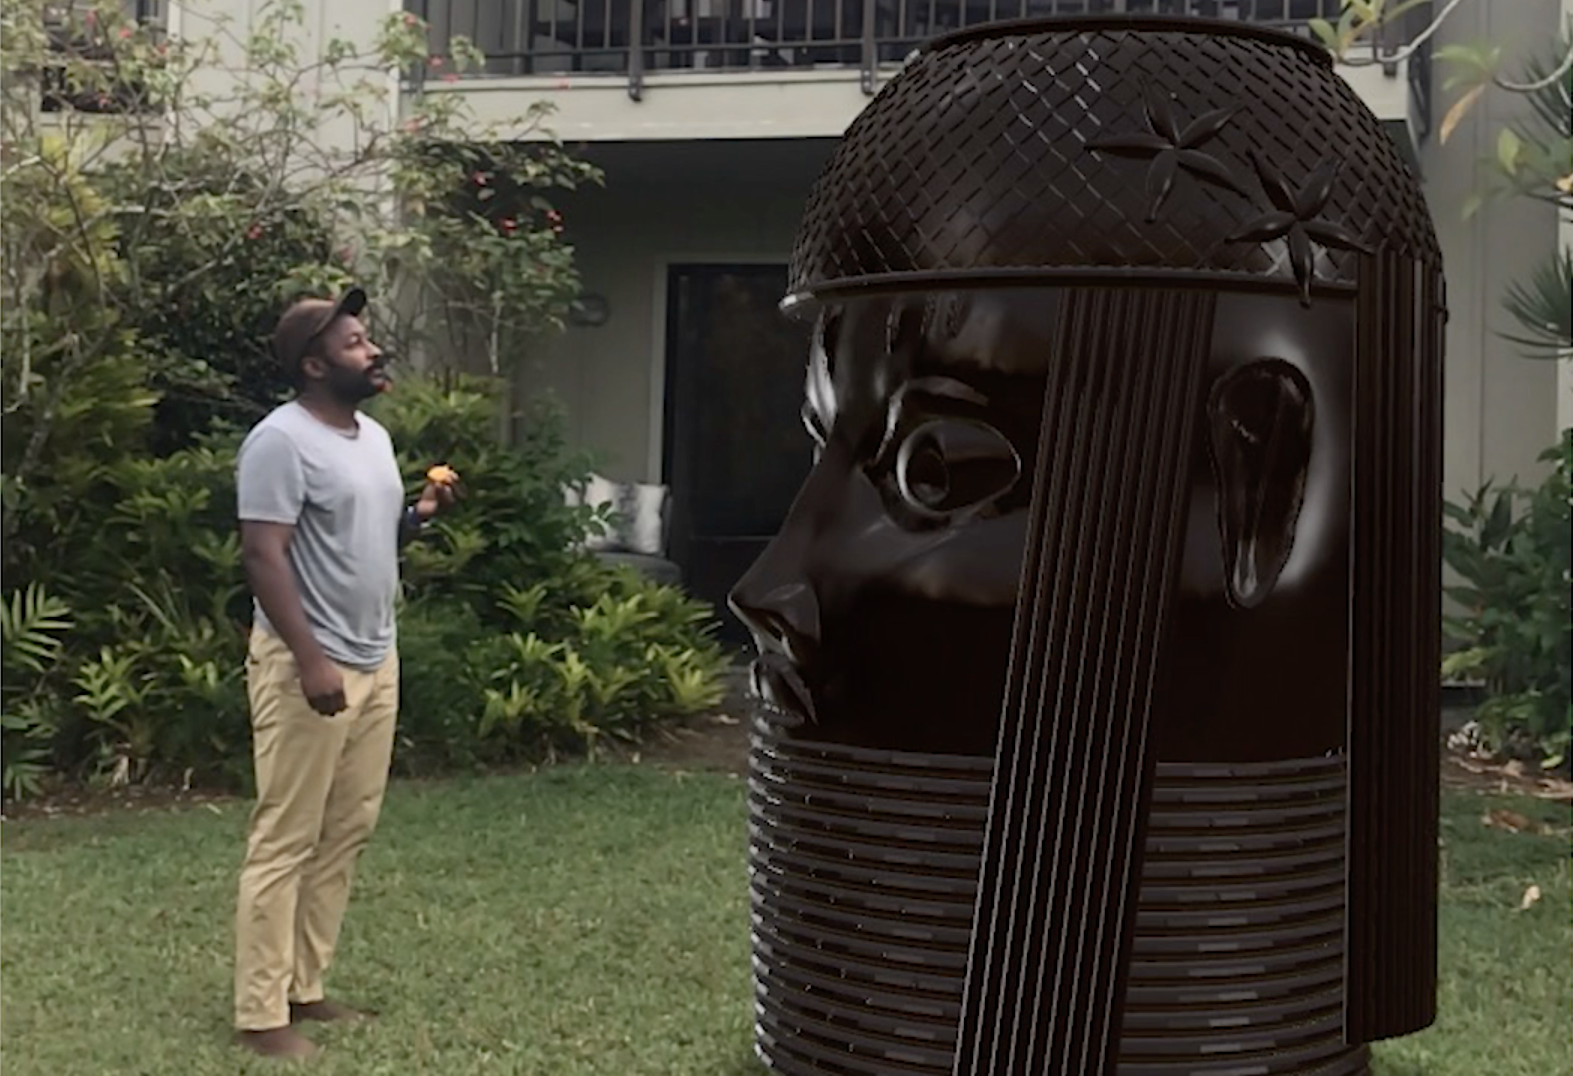 A Black person wearing a baseball cap, grey t-shirt and khaki pants standing on a lawn and gazing at a larger than life-size augmented reality rendering of a bronze King's Head sculpture from the Kingdom of Benin. The background is the landscaped exterior of an apartment building.